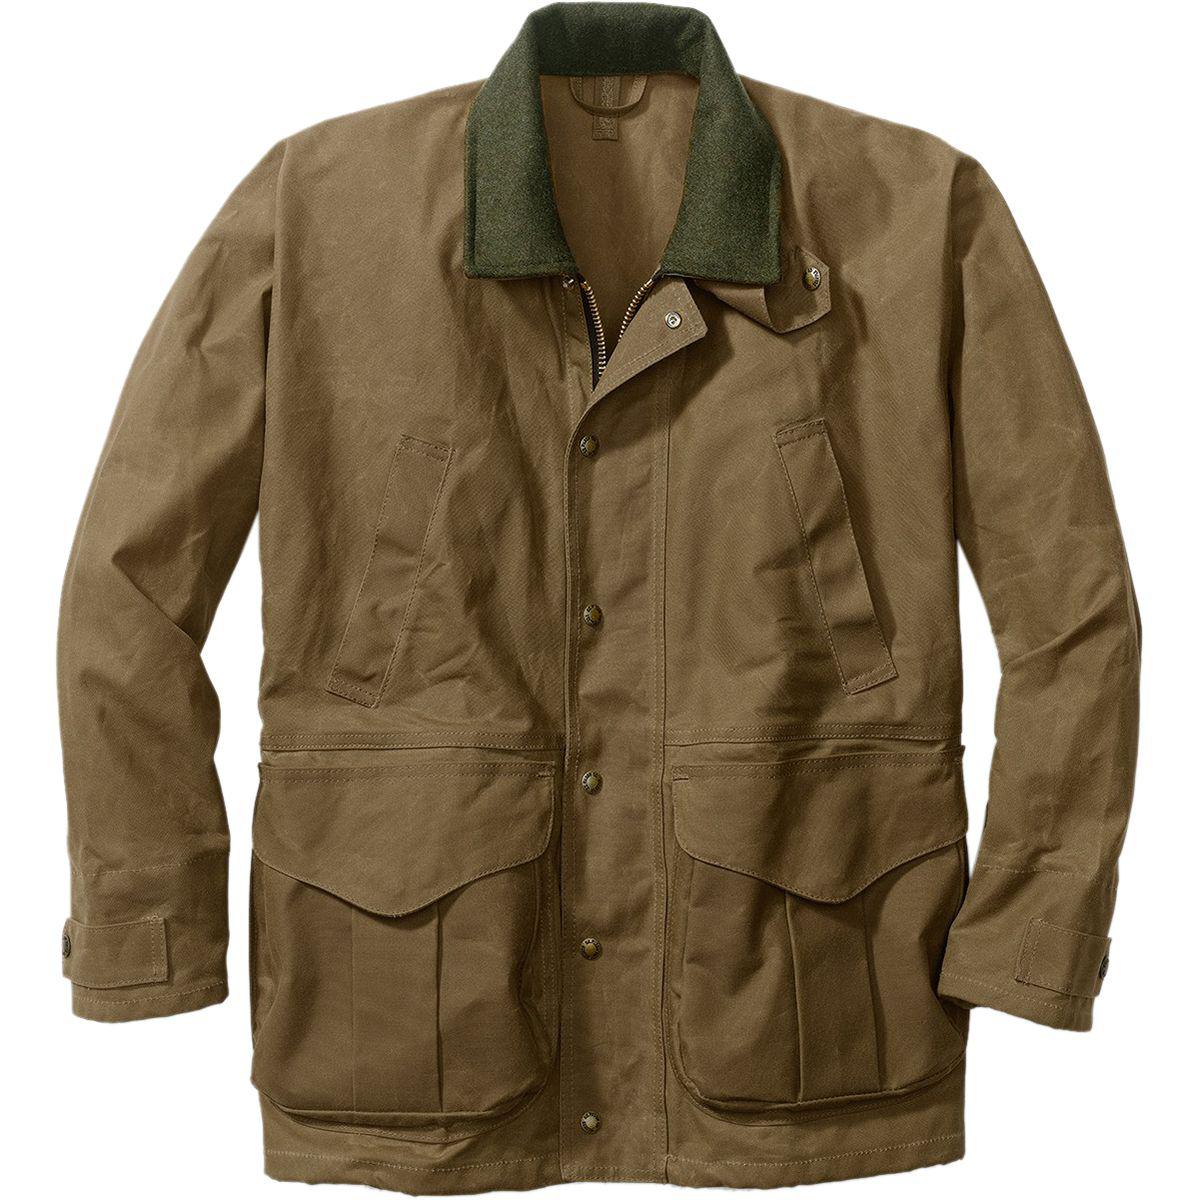 Lyst - Filson Tin Cloth Field Jacket in Brown for Men